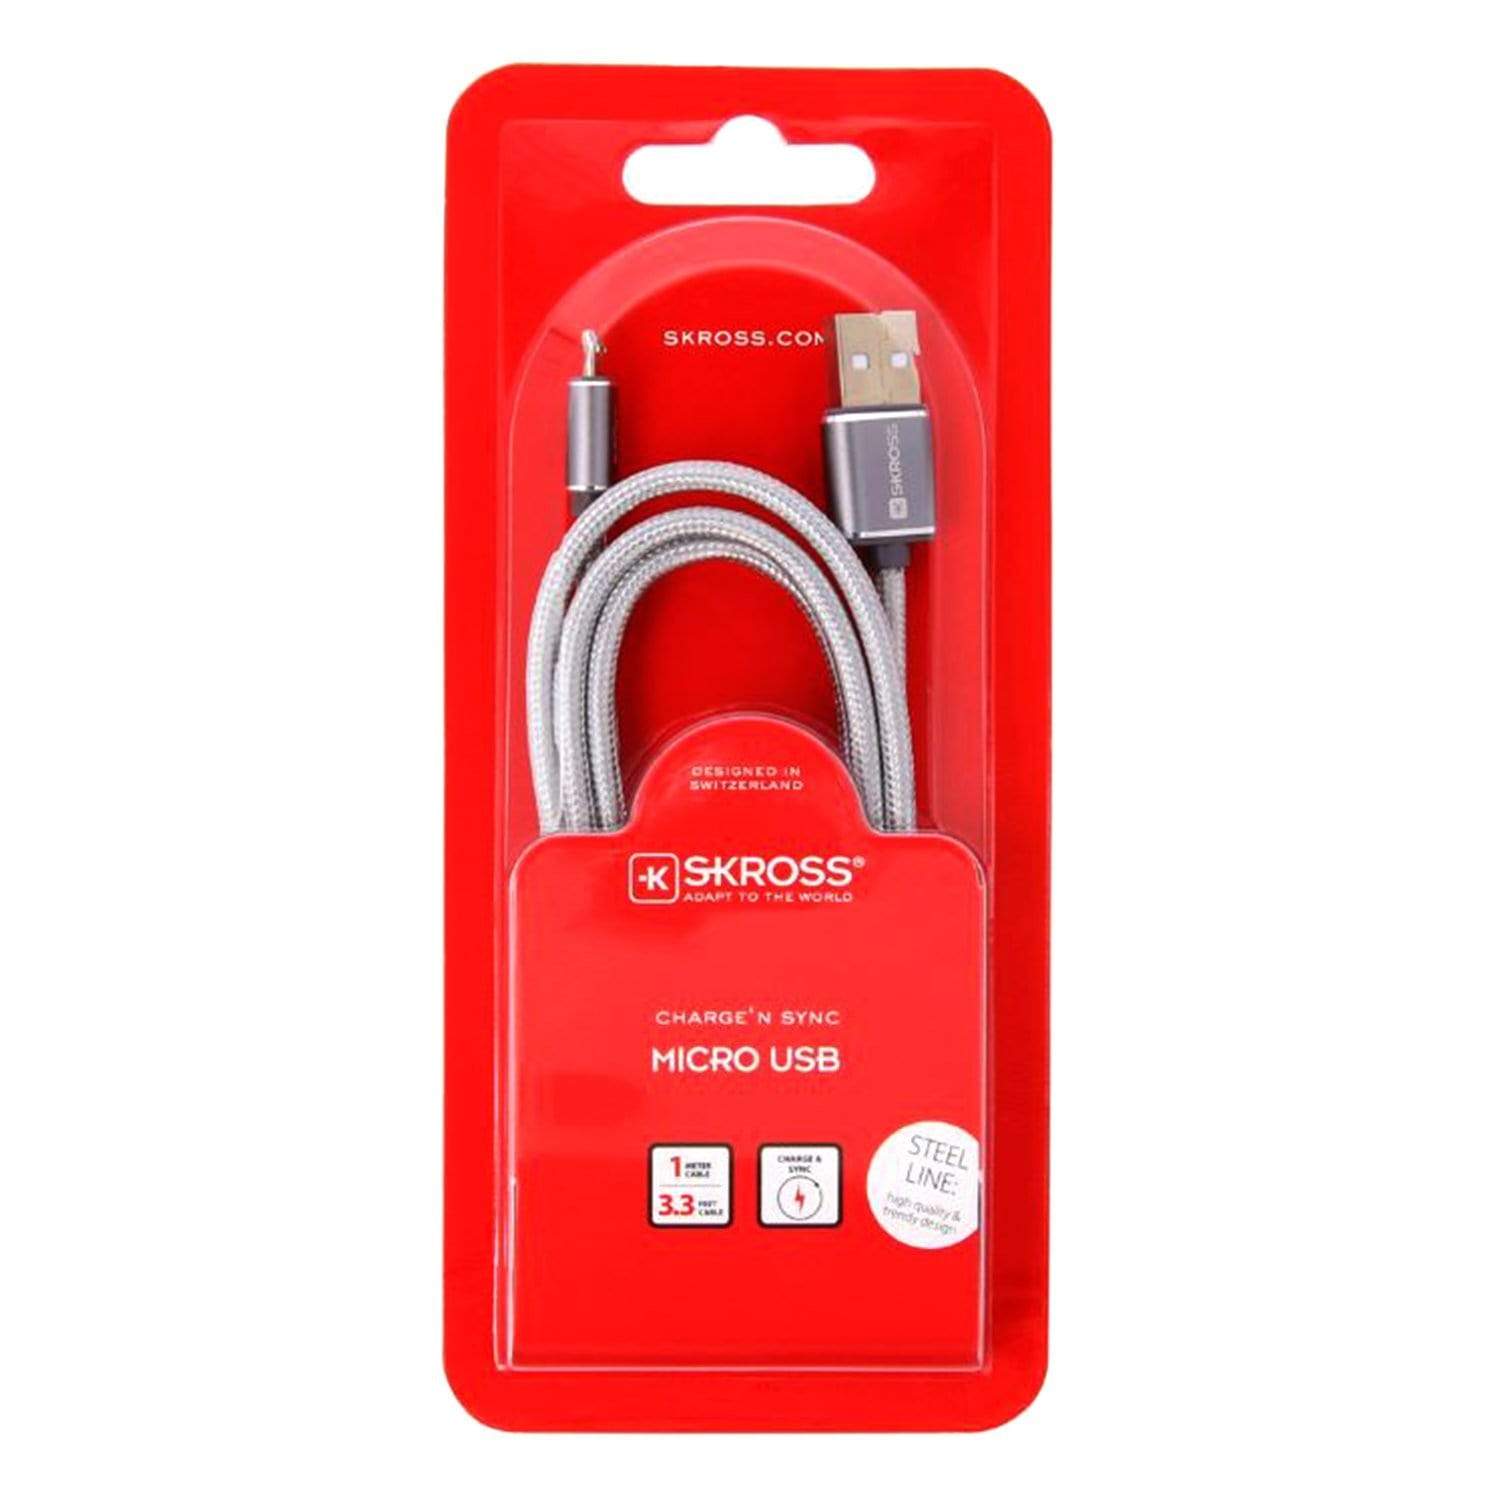 Skross Steel Line Charge N Sync Micro USB Cable - Silver - 2700240 - Jashanmal Home